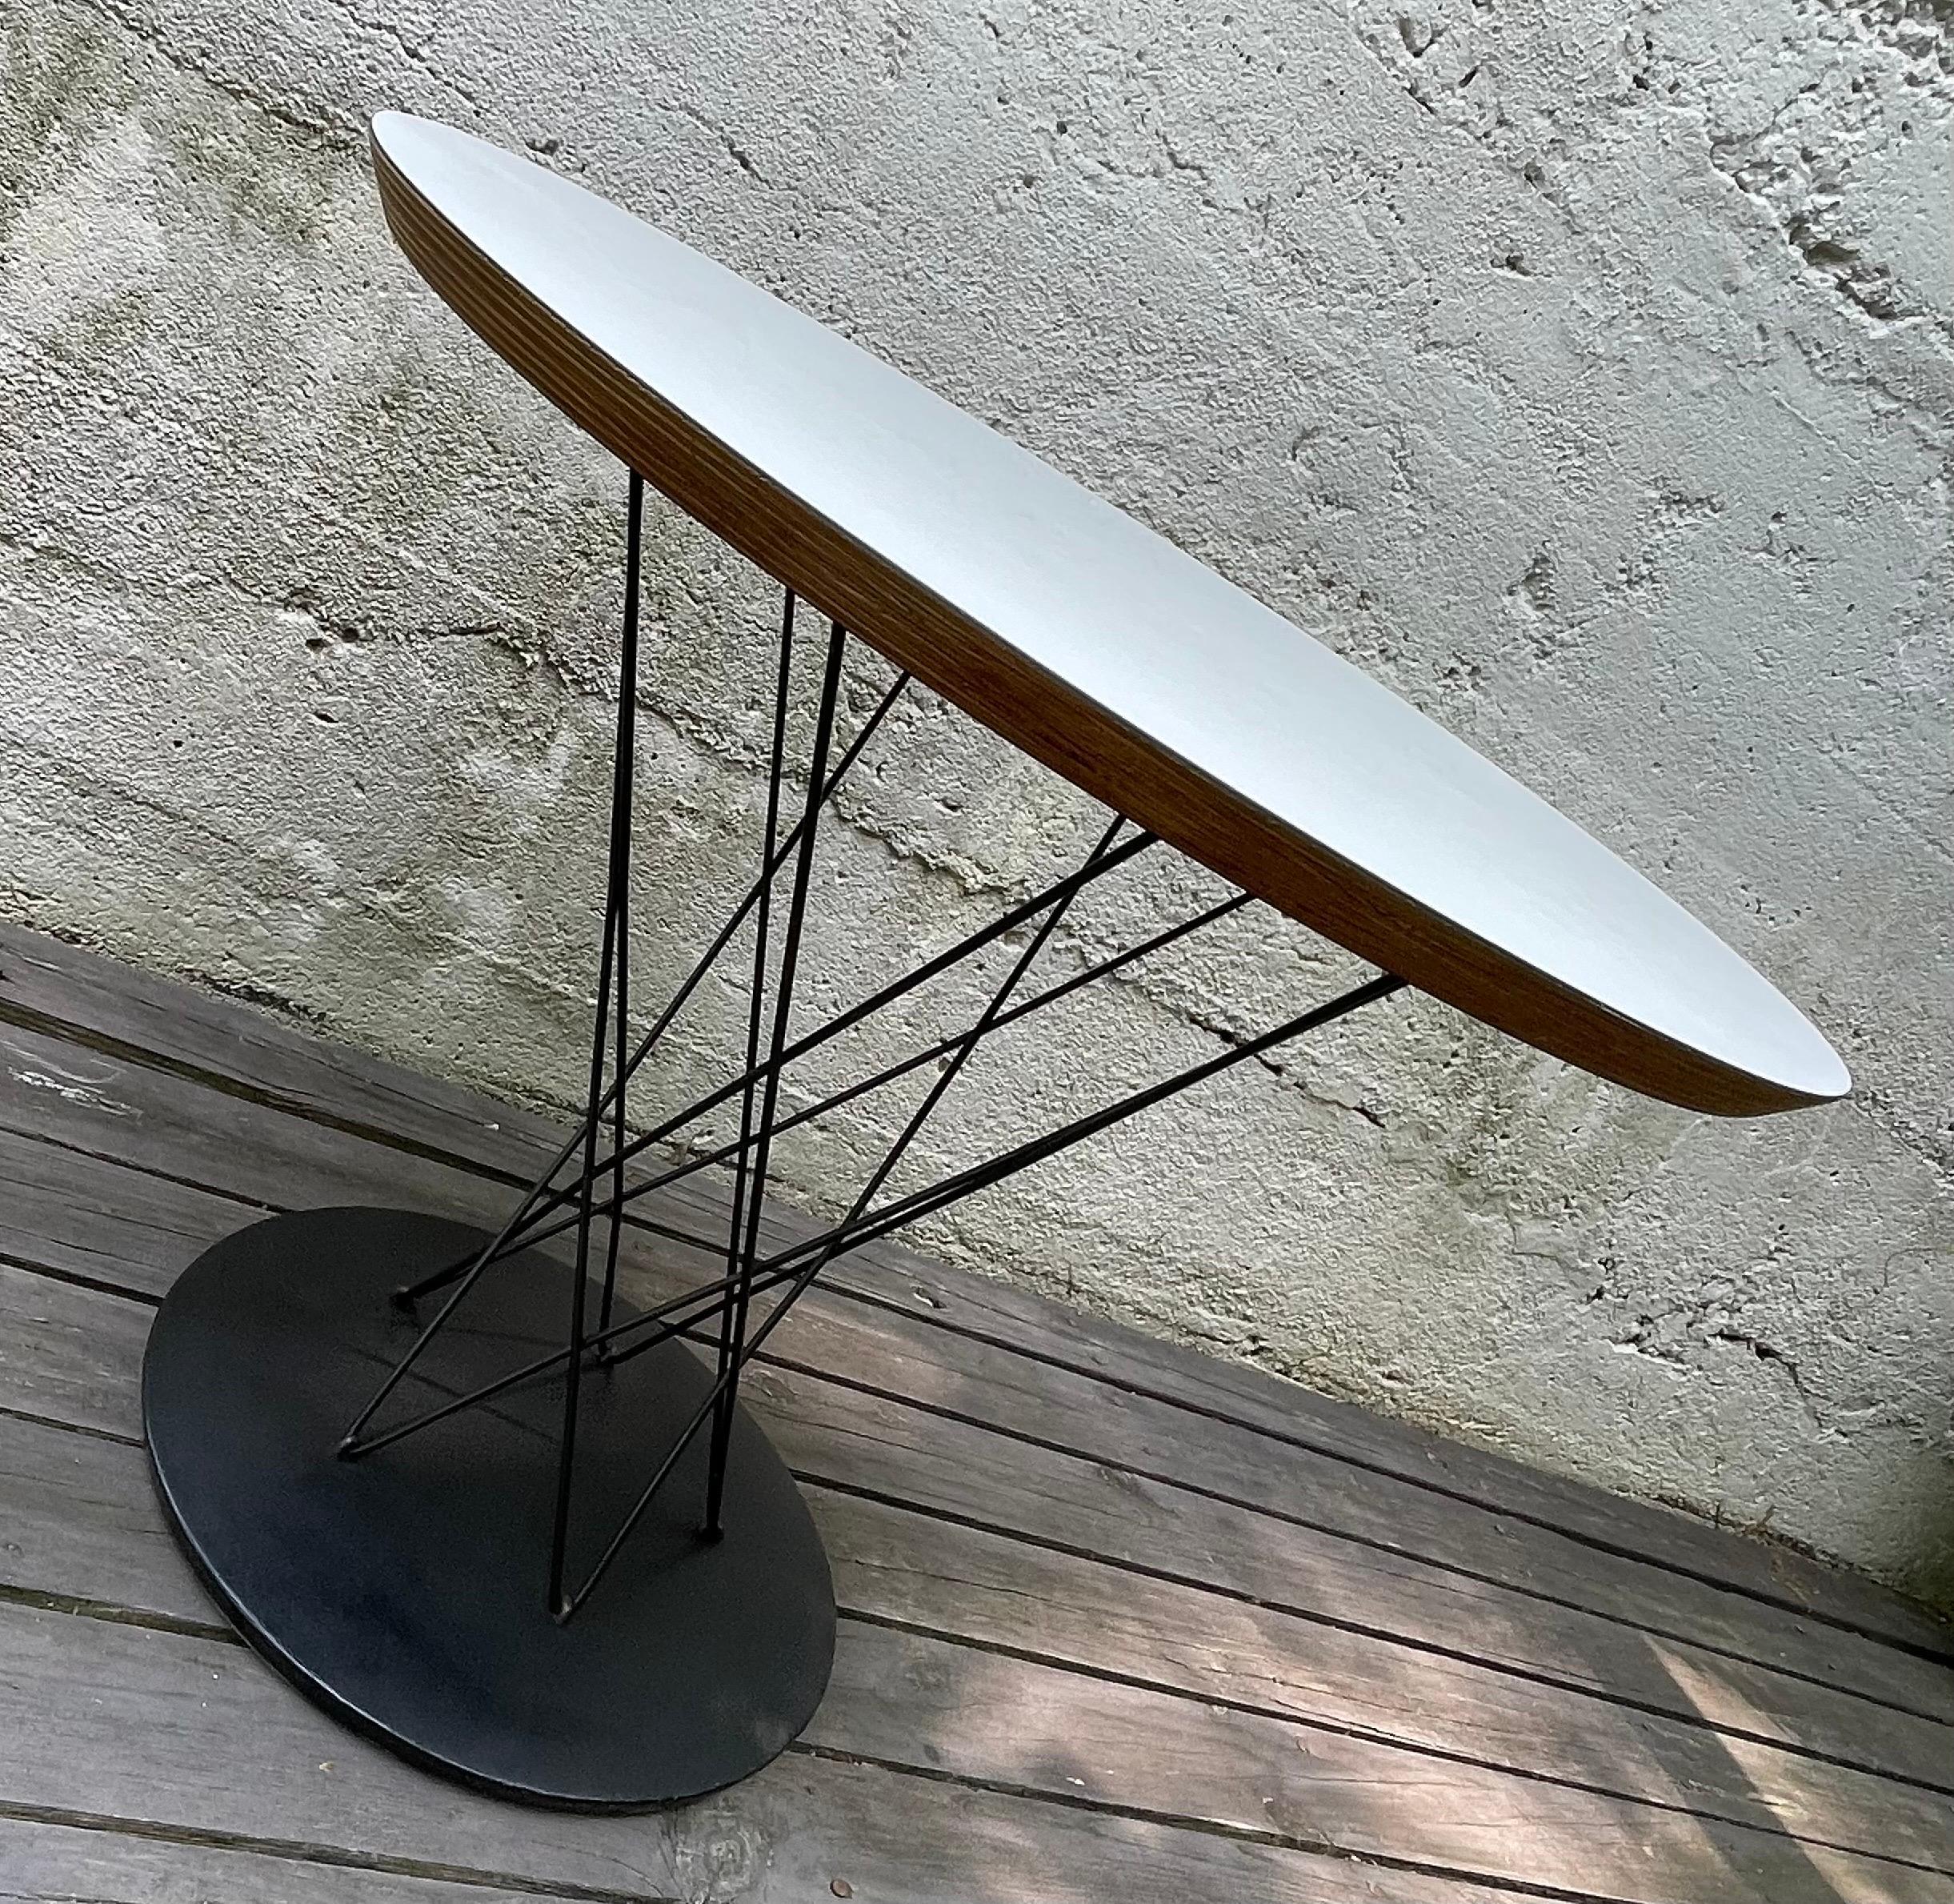 Midcentury Isamu Noguchi Cyclone side table, Model 87 circa 1970 for Knoll International. Original condition, professionally cleaned.

Isamu Noguchi was an acclaimed American sculptor, furniture designer, and landscape architect. Throughout his